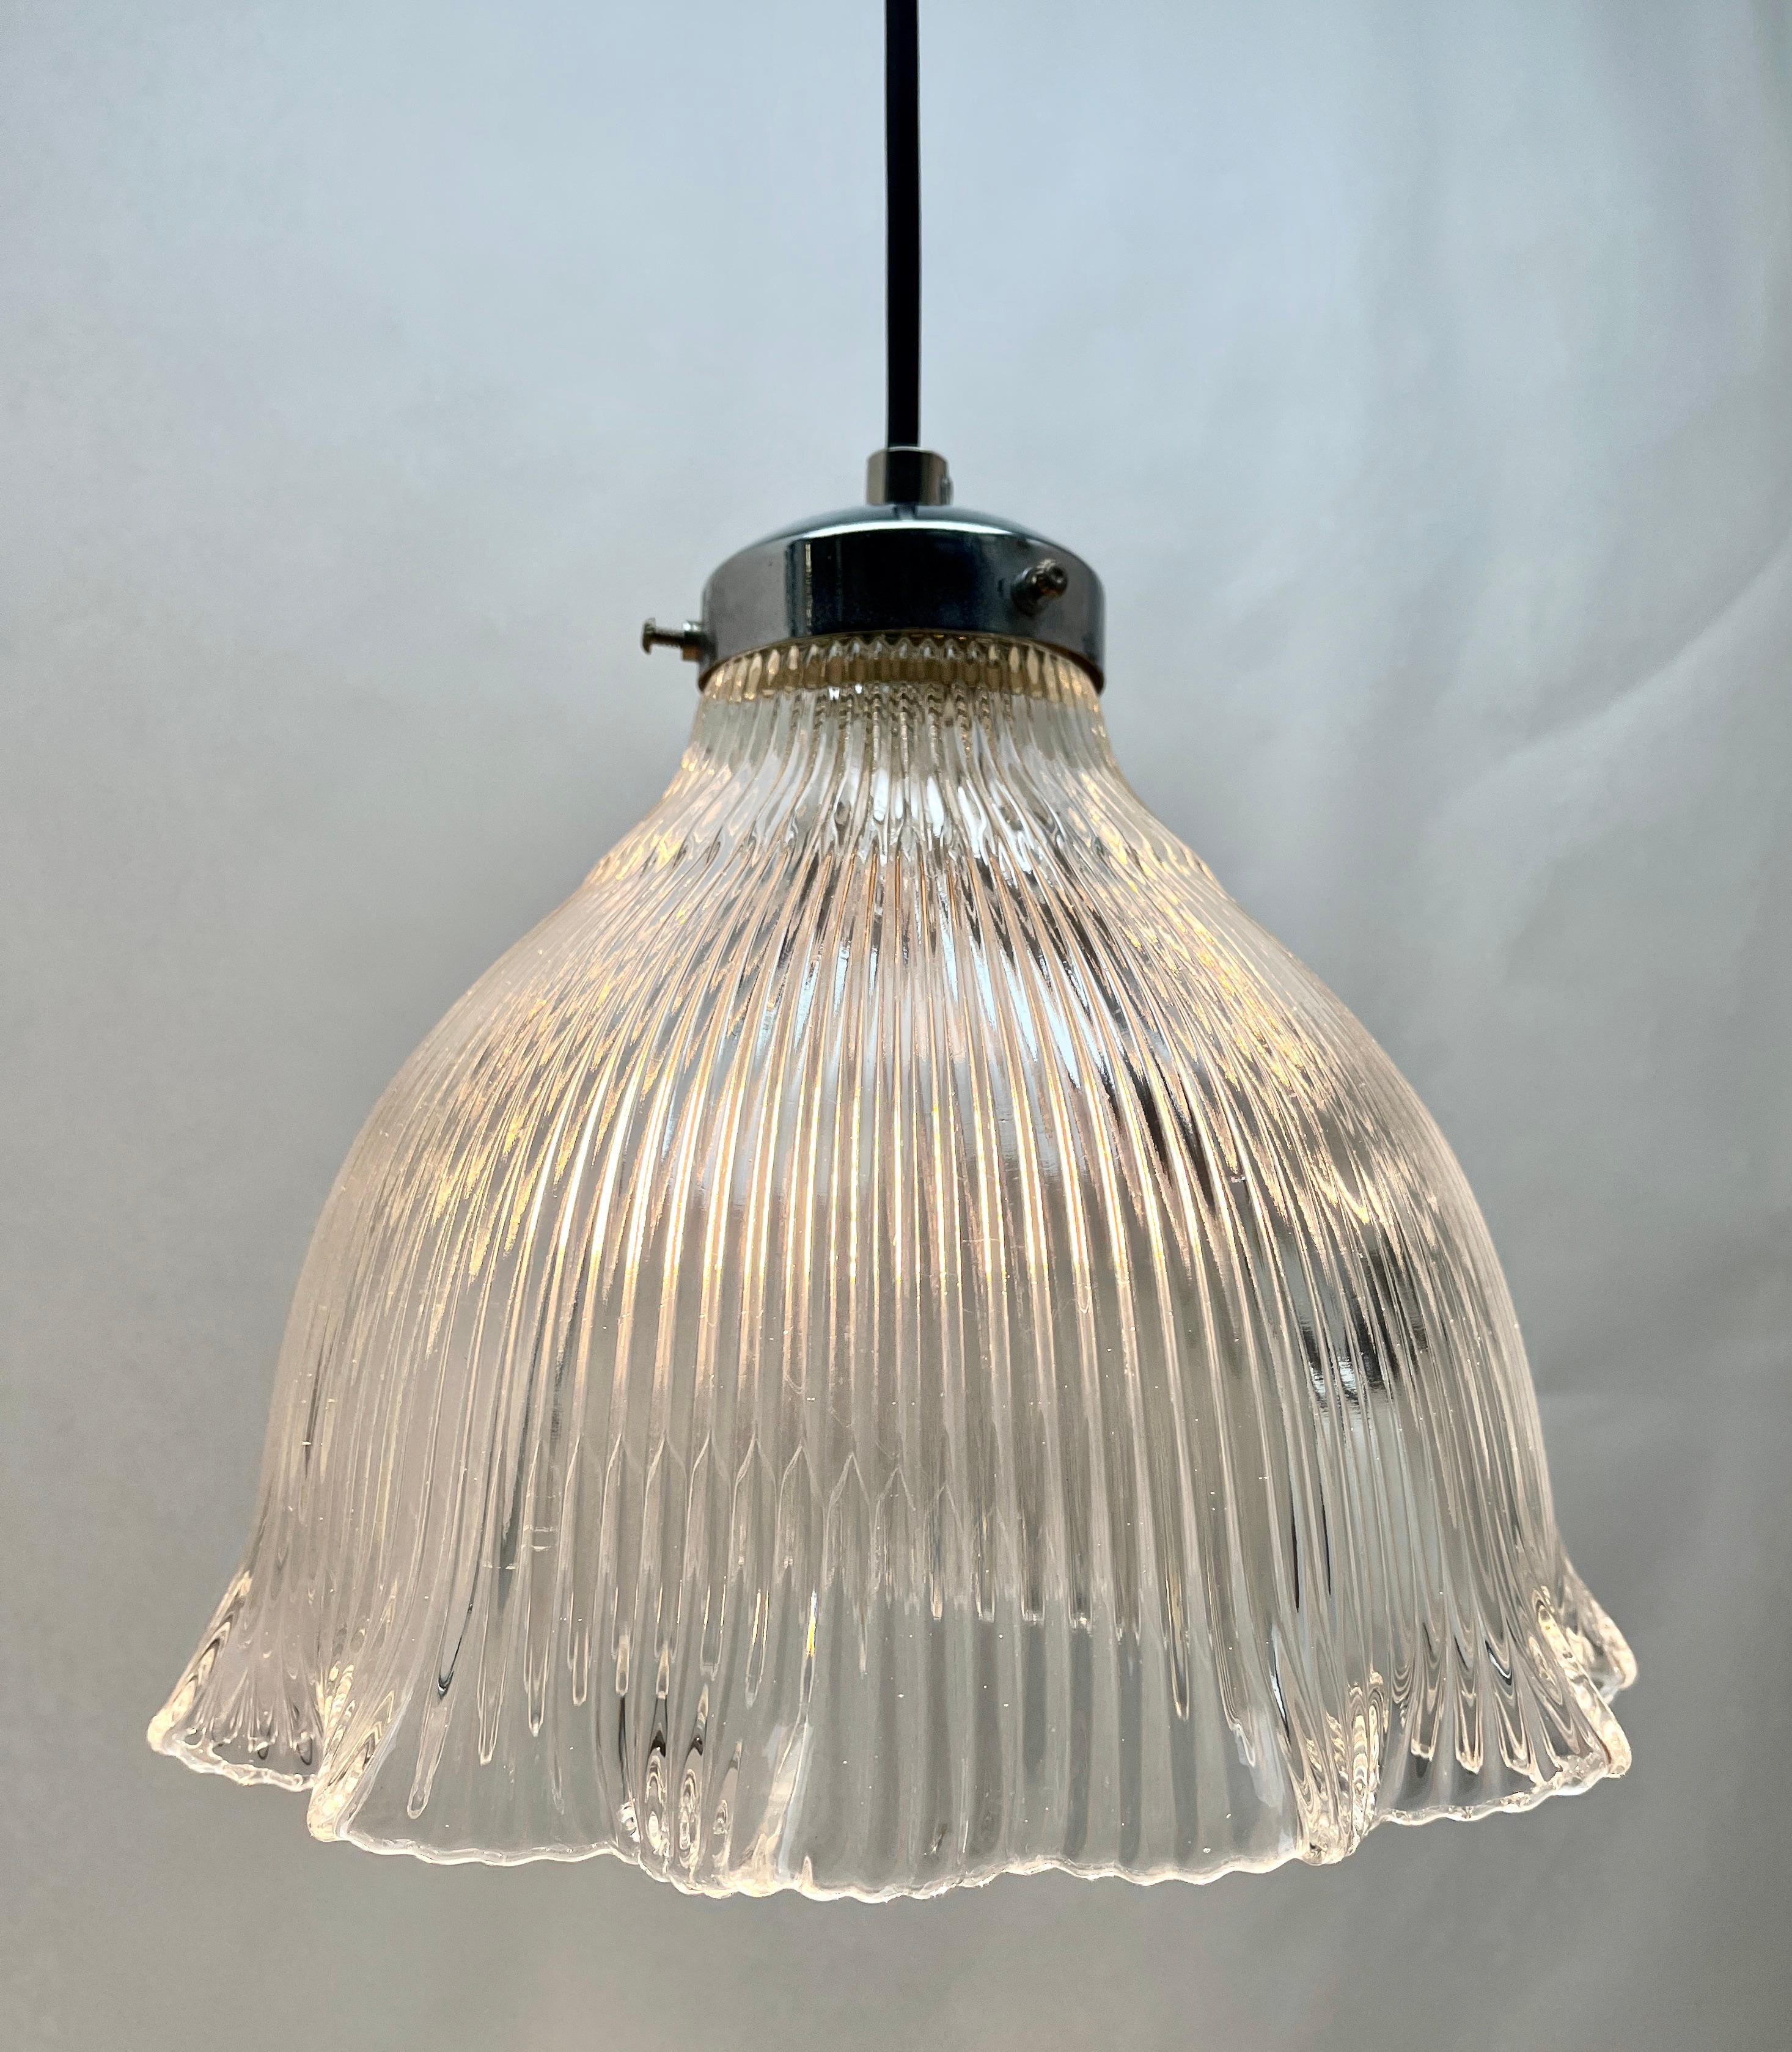 Pendant Lamp with a Corrugated Glass Shade, 1950s, Netherlands For Sale 1